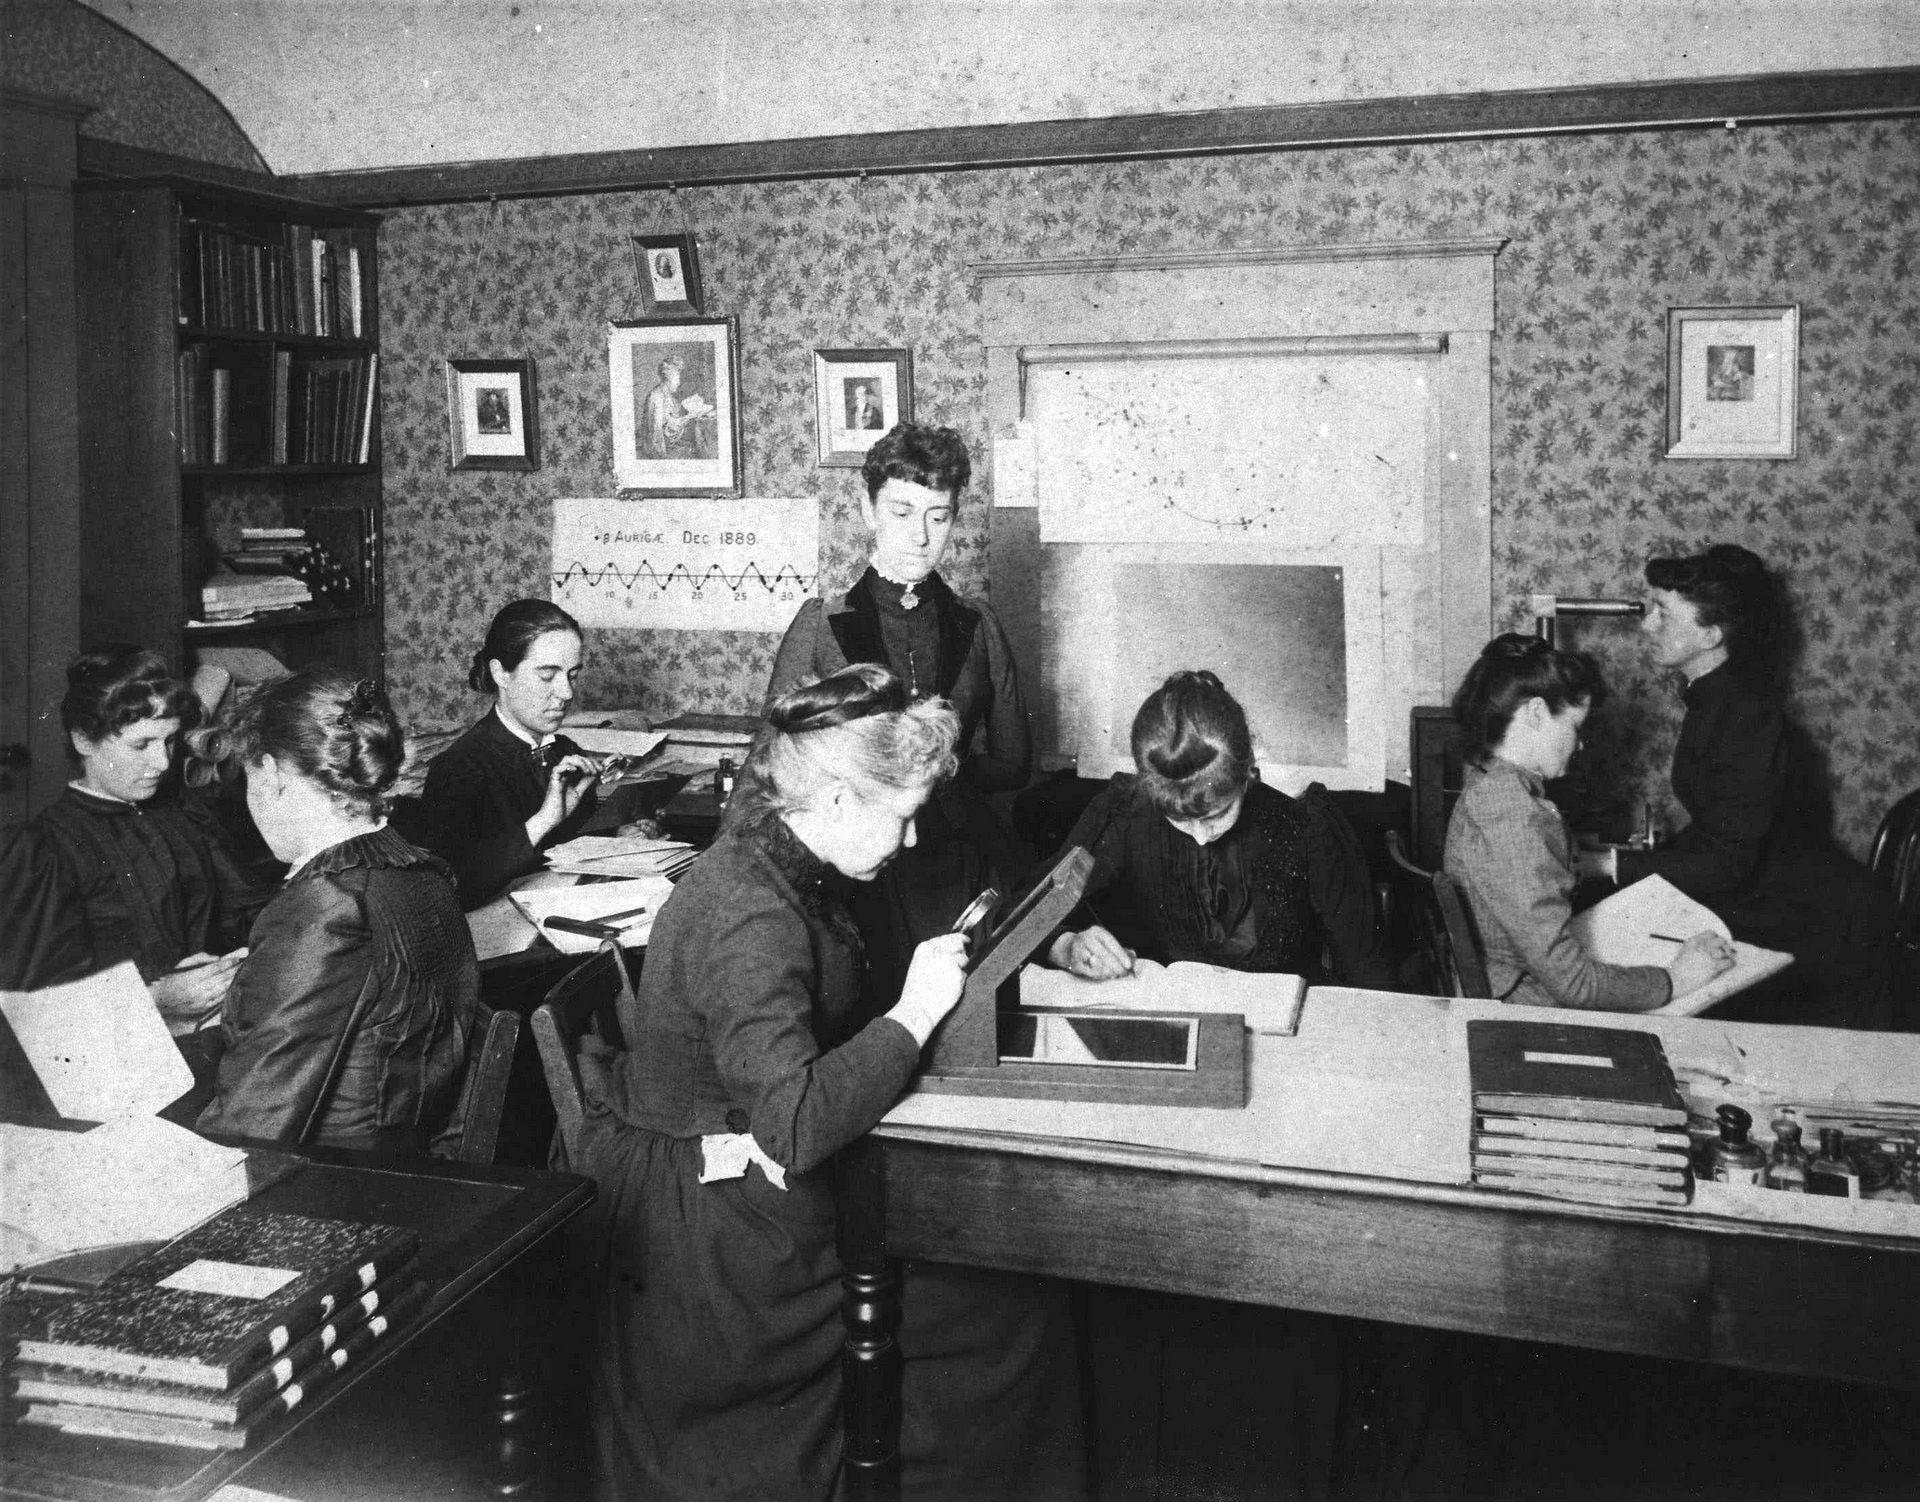 Picker’s female staff at the Harvard College Observatory, circa 1890.